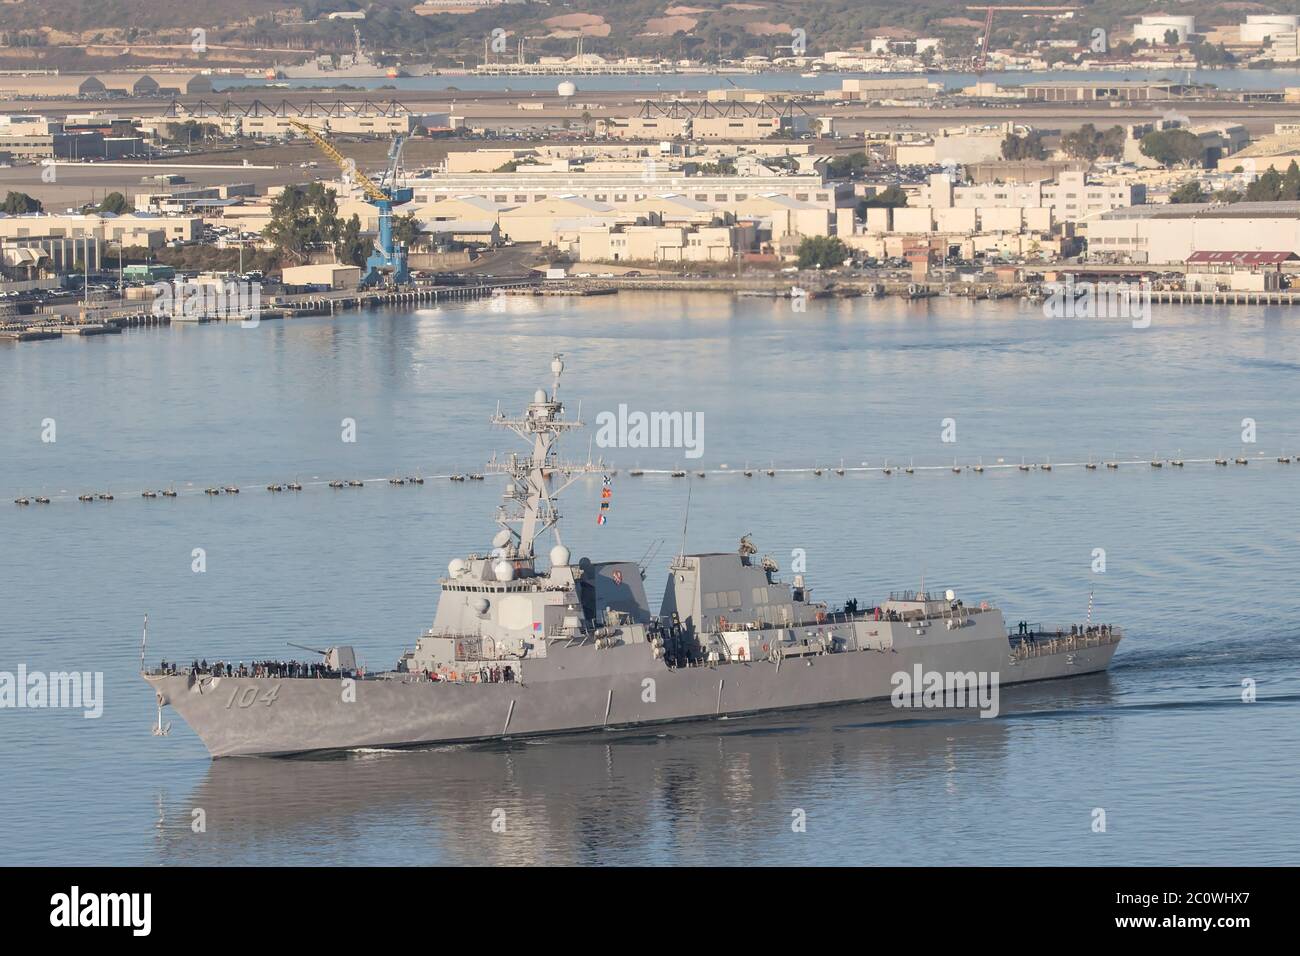 DDG-104 USS Sterett Arleigh Burke Class Destroyer of the United States Navy at San Diego Naval Base October 2019 Stock Photo